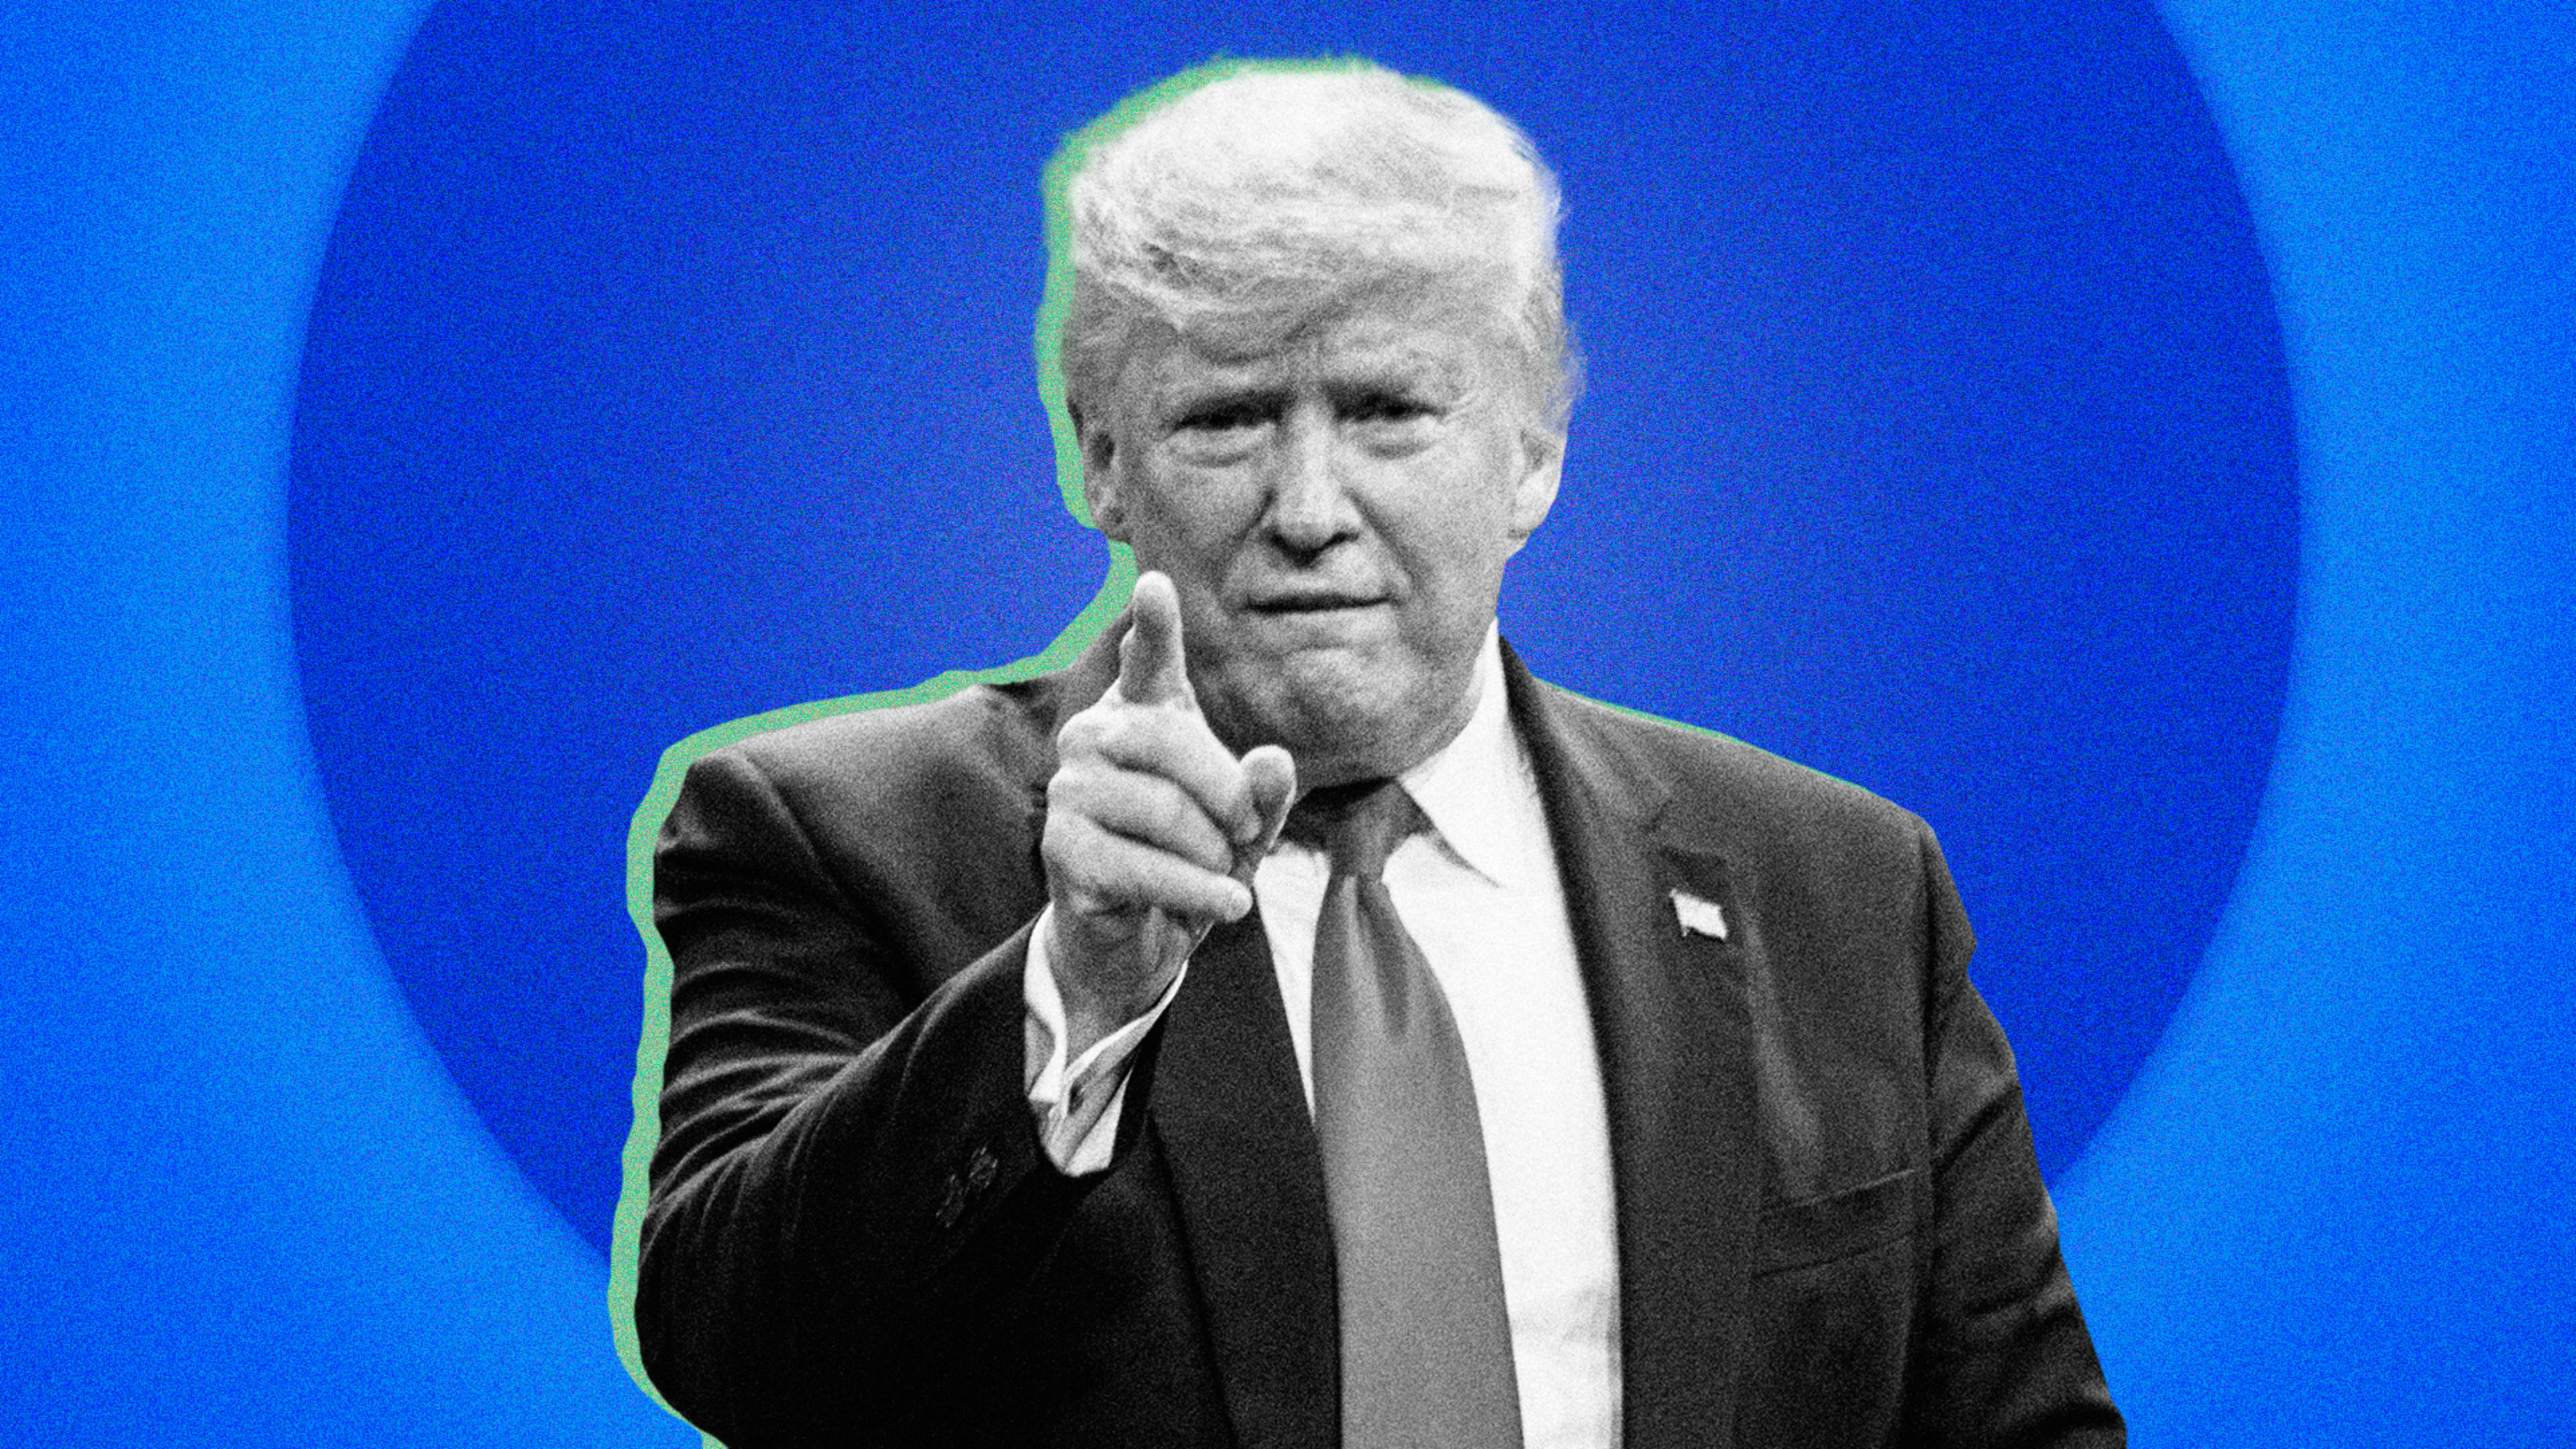 Trump is taking full advantage of Facebook’s lie-friendly ad policy